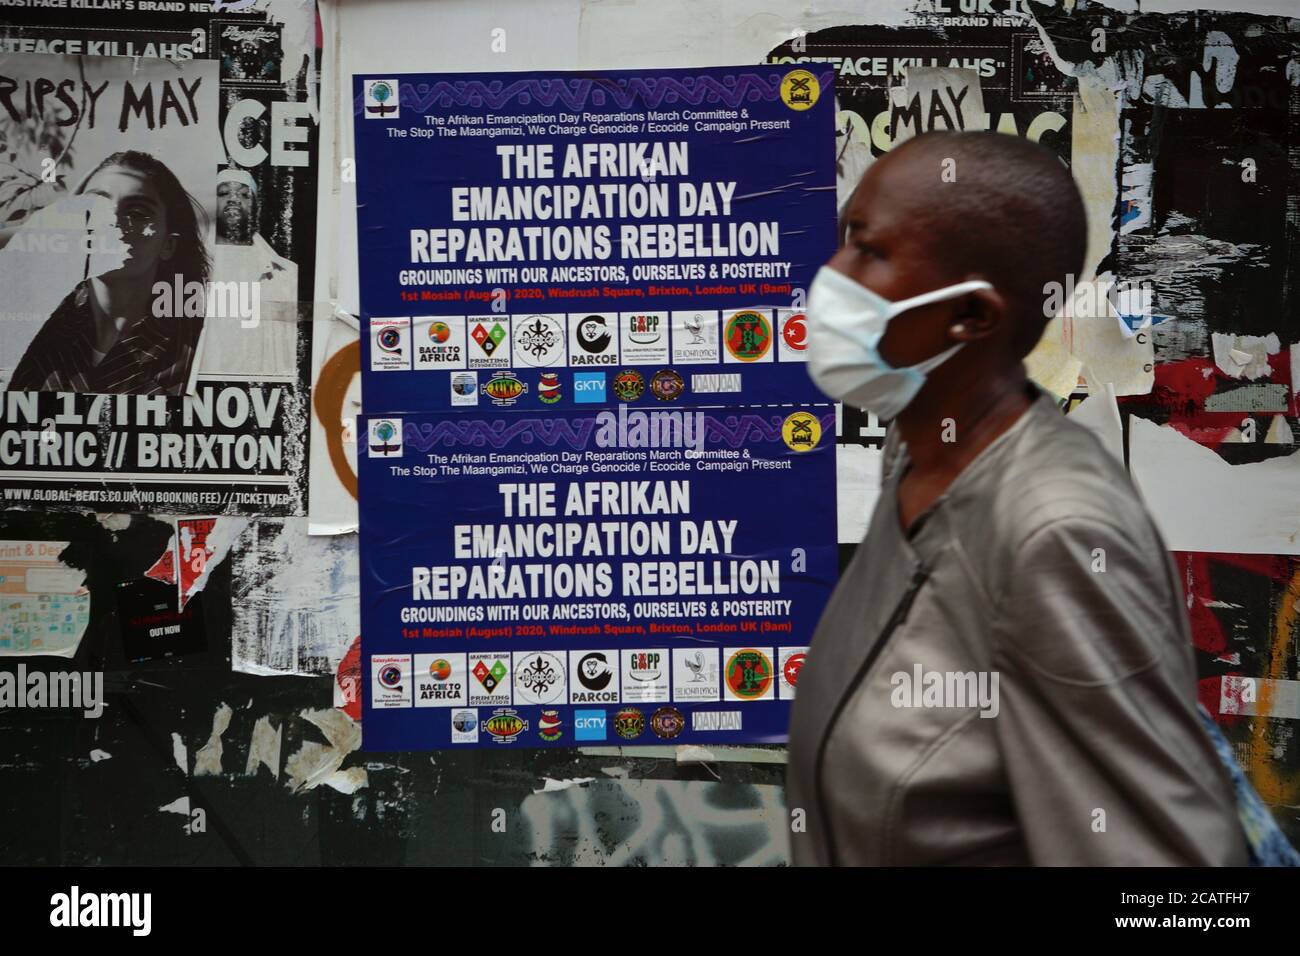 Peckham   London (UK), August 2020: A woman wearing a face covering walks past a poster advertising 'Afrikan Emancipation Day' in SE London. Emancipat Stock Photo